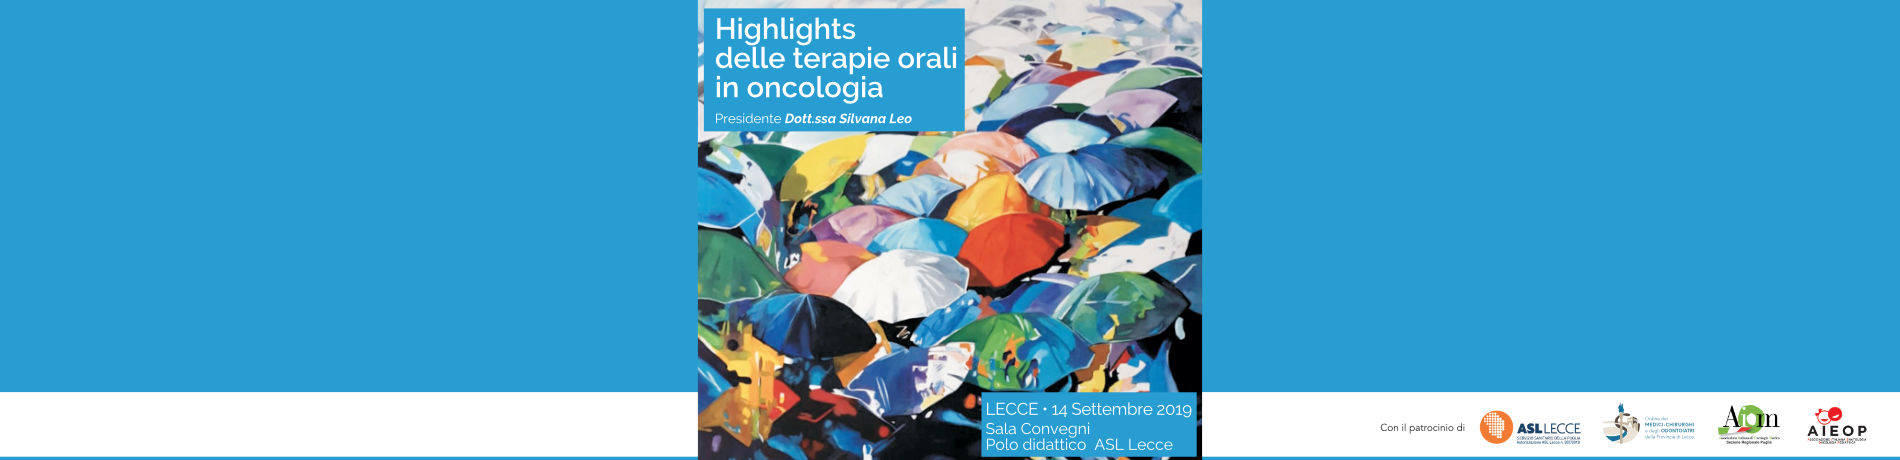 https://www.formedica.it/wp/wp-content/uploads/2019/07/2019_09_14_Highlights-delle-terapie-orali-in-oncologia.jpg